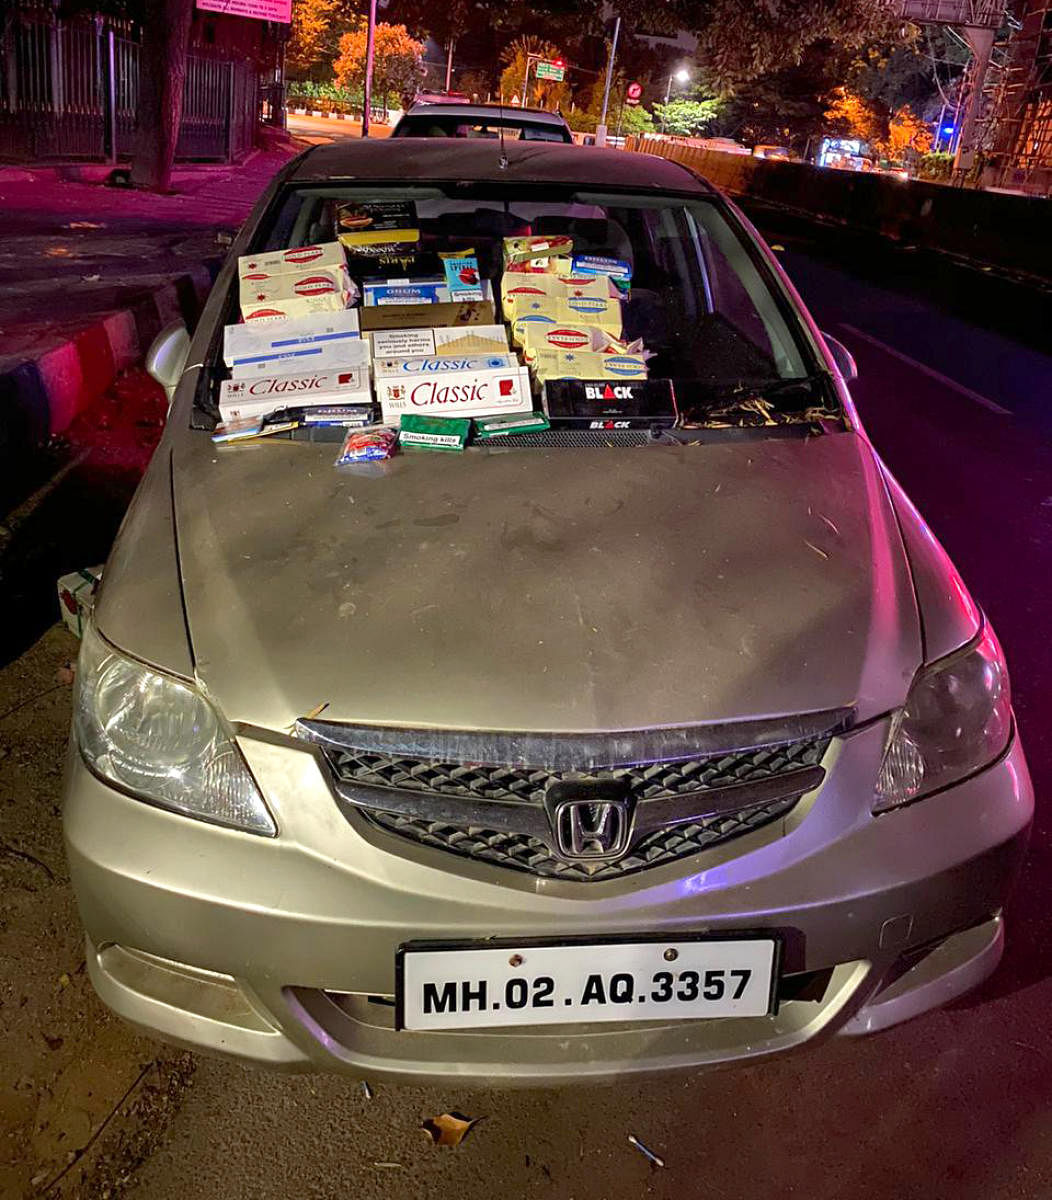 The cigarettes were delivered by this car. SPECIAL ARRANGEMENT